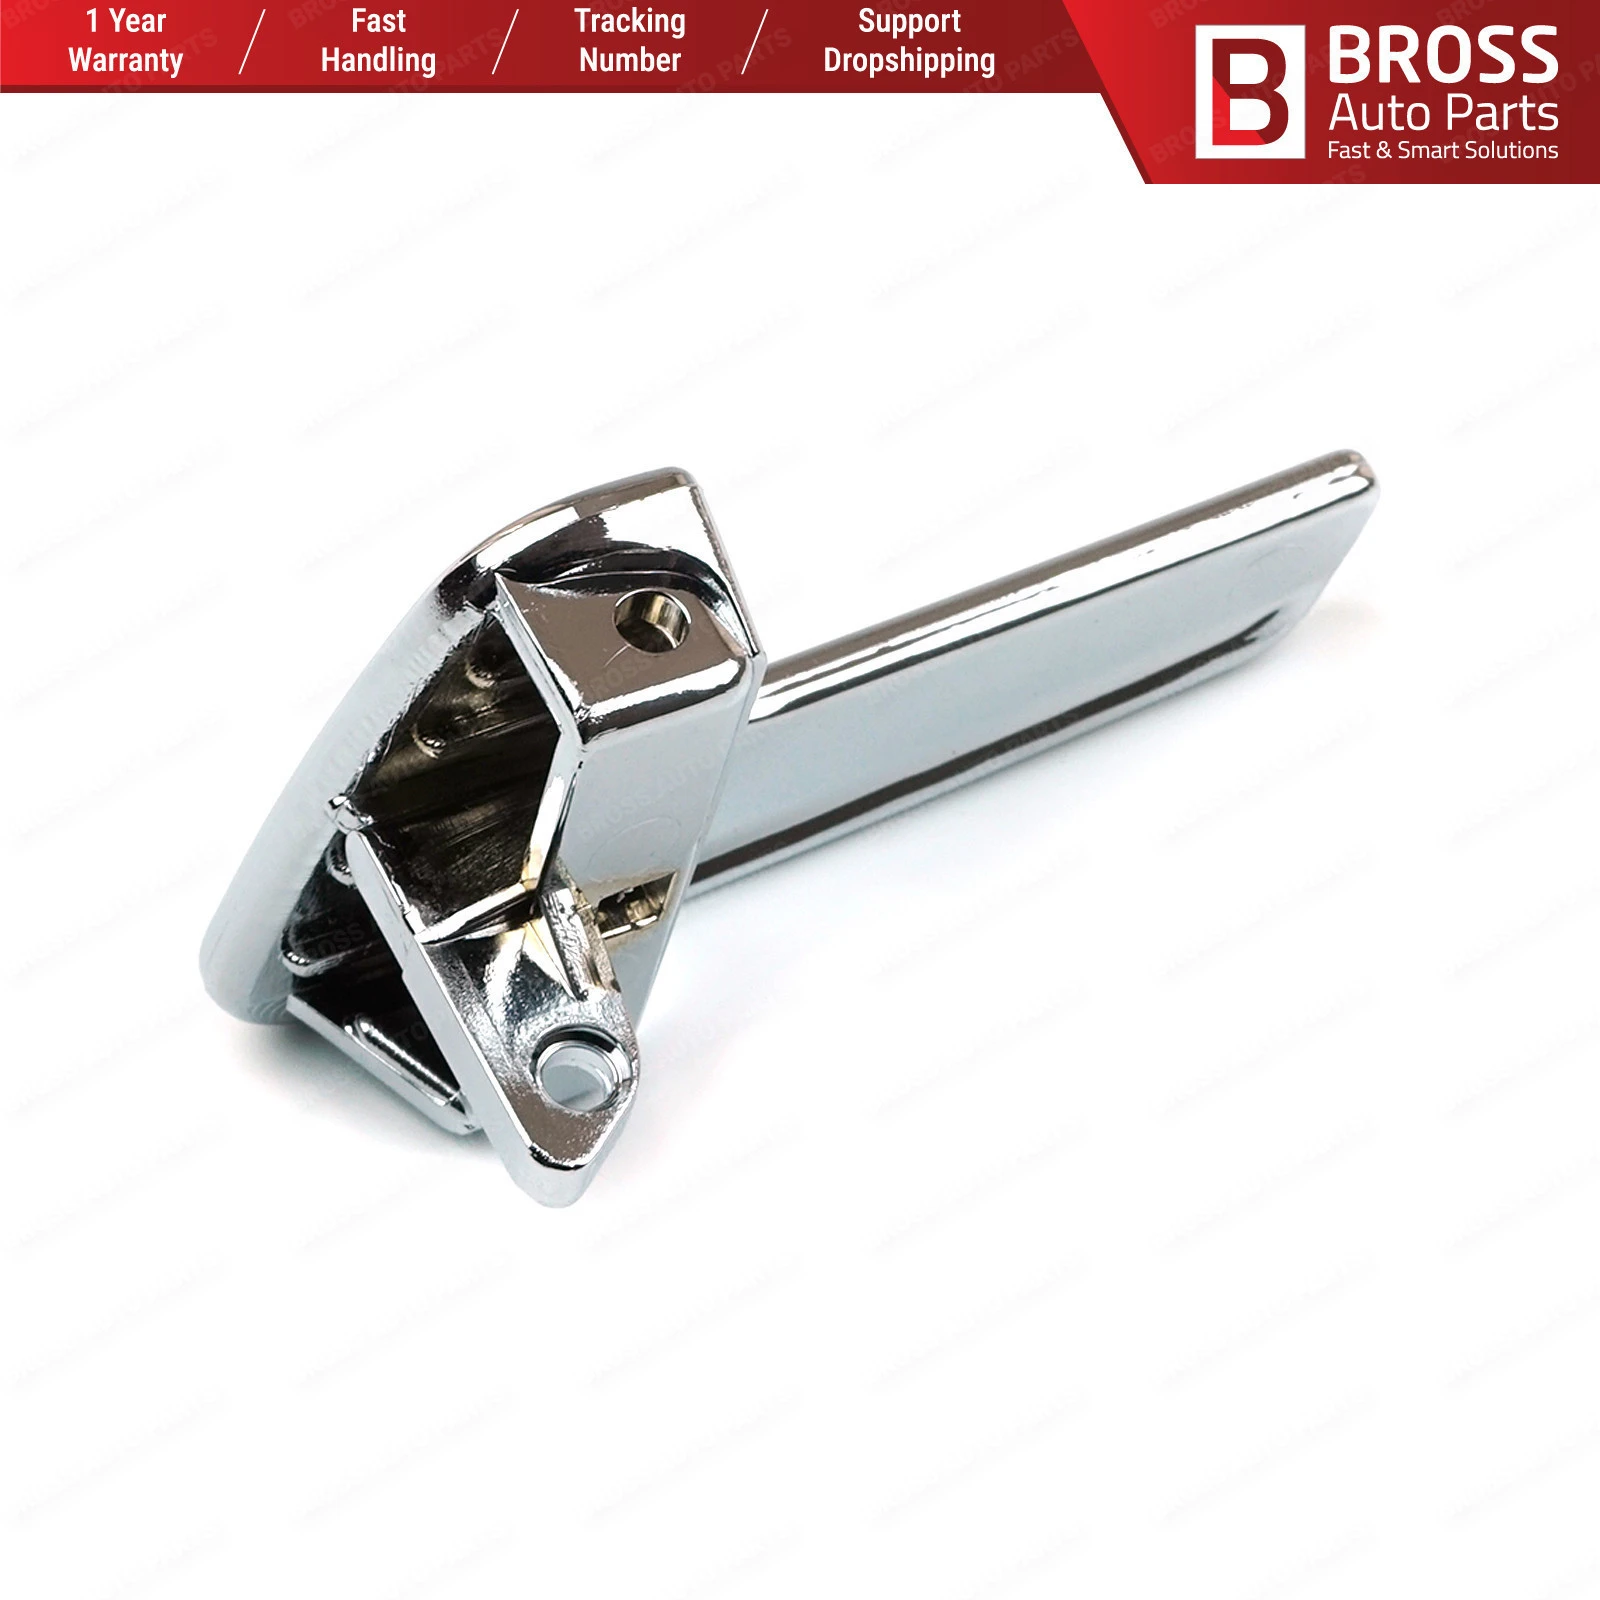 BDP40 Chrome Color Stainless Plastic Interior Door Opener Handle 6K0837114, 6K0 837 114, 6K0837114A for Front or Rear Right